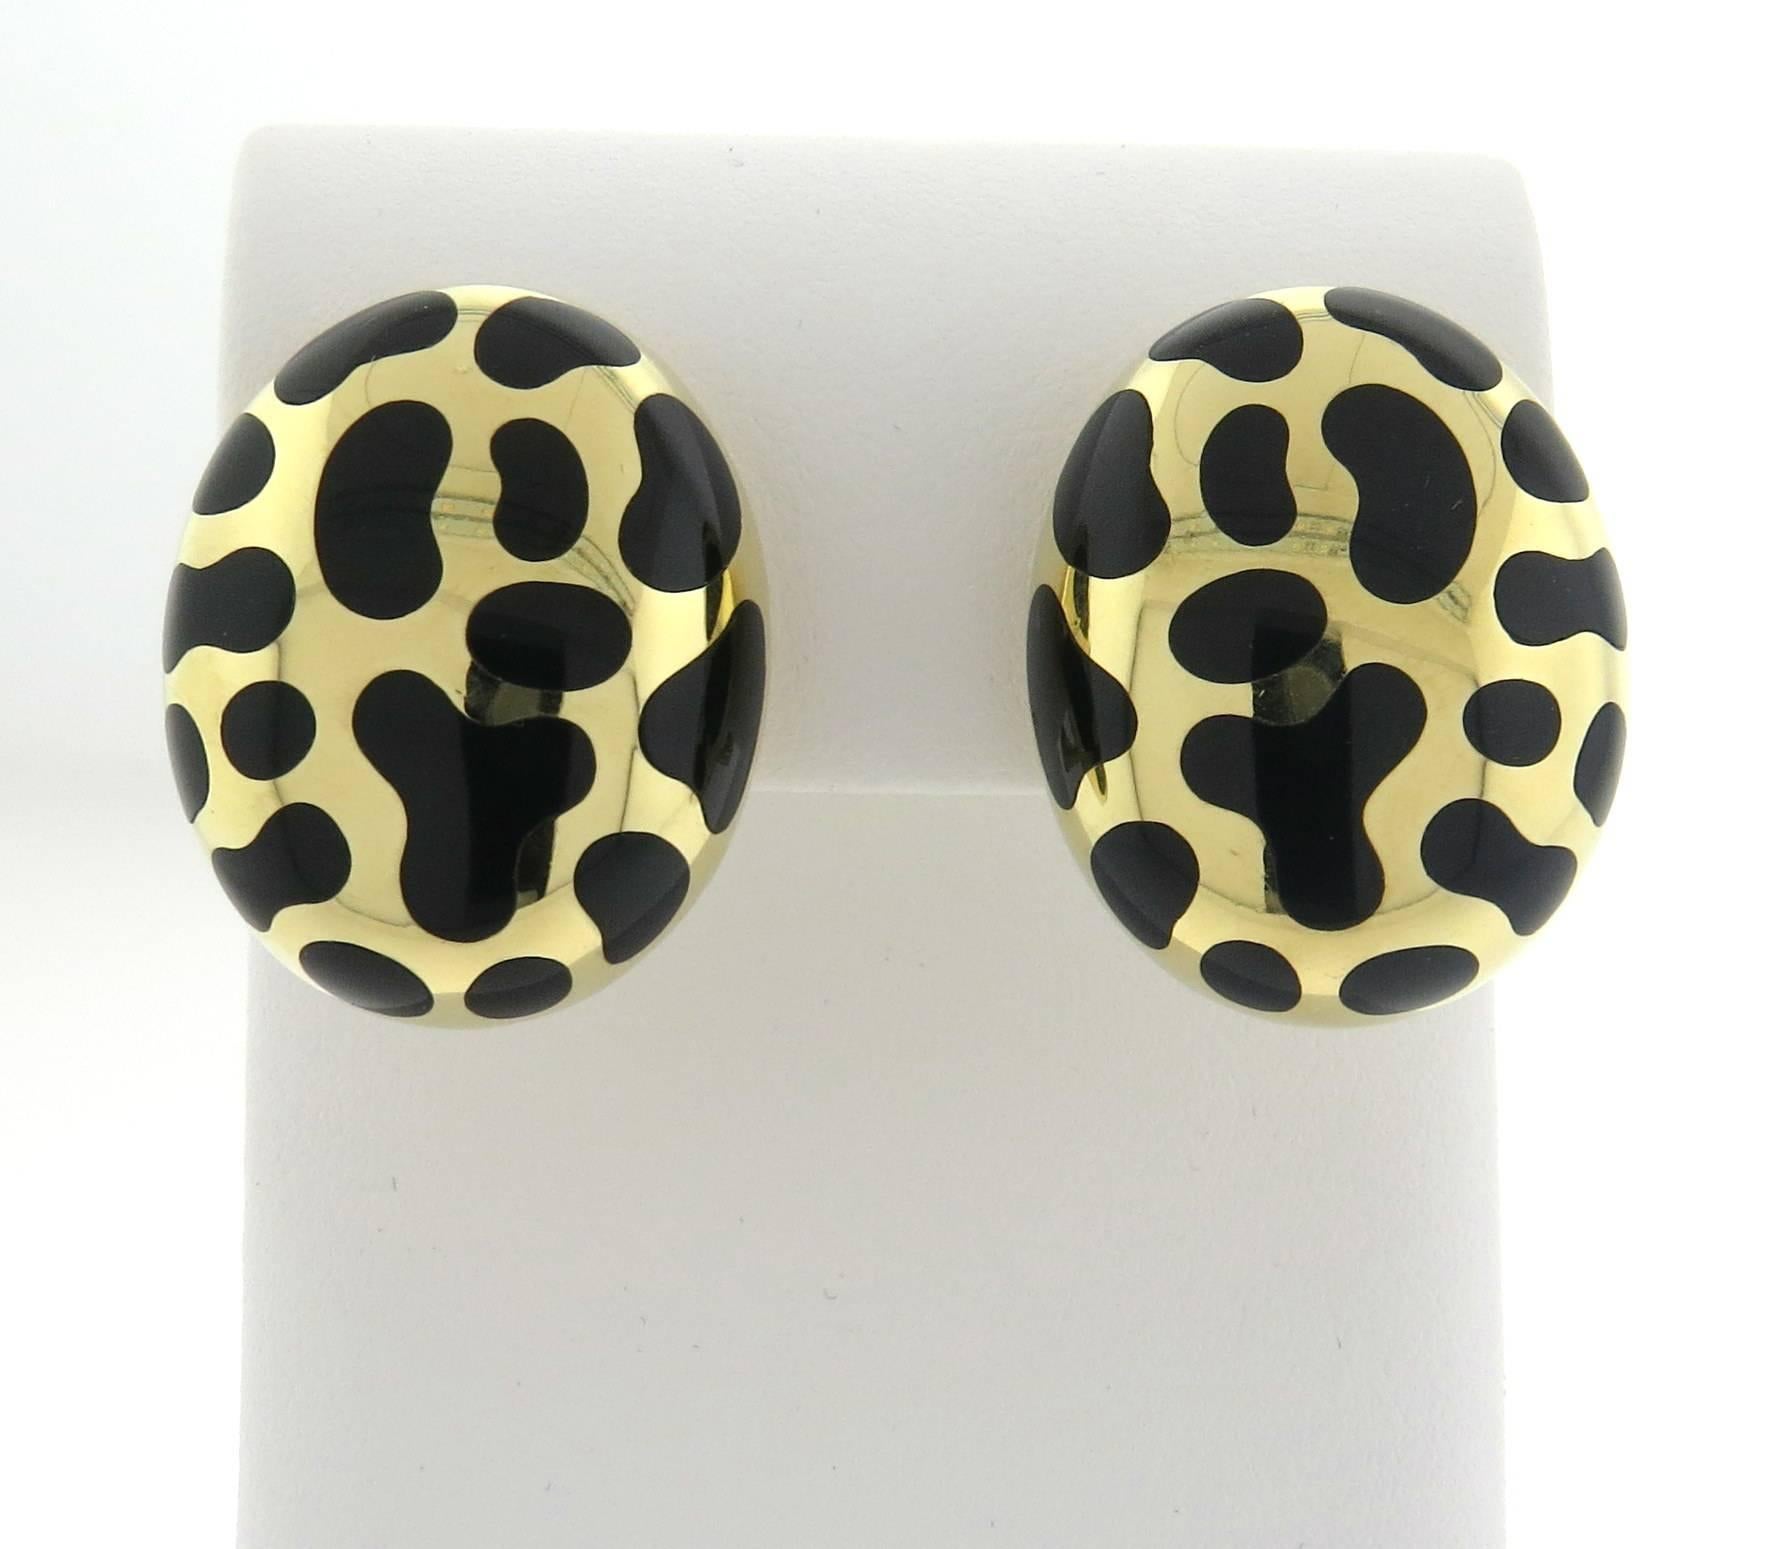 A pair of large oval 18k yellow gold earrings, crafted by Angela Cummings, featuring conic black jade inlay design. Earrings are 27mm x 22mm . Marked: Angela Cummings 750. Weight - 22.1 grams